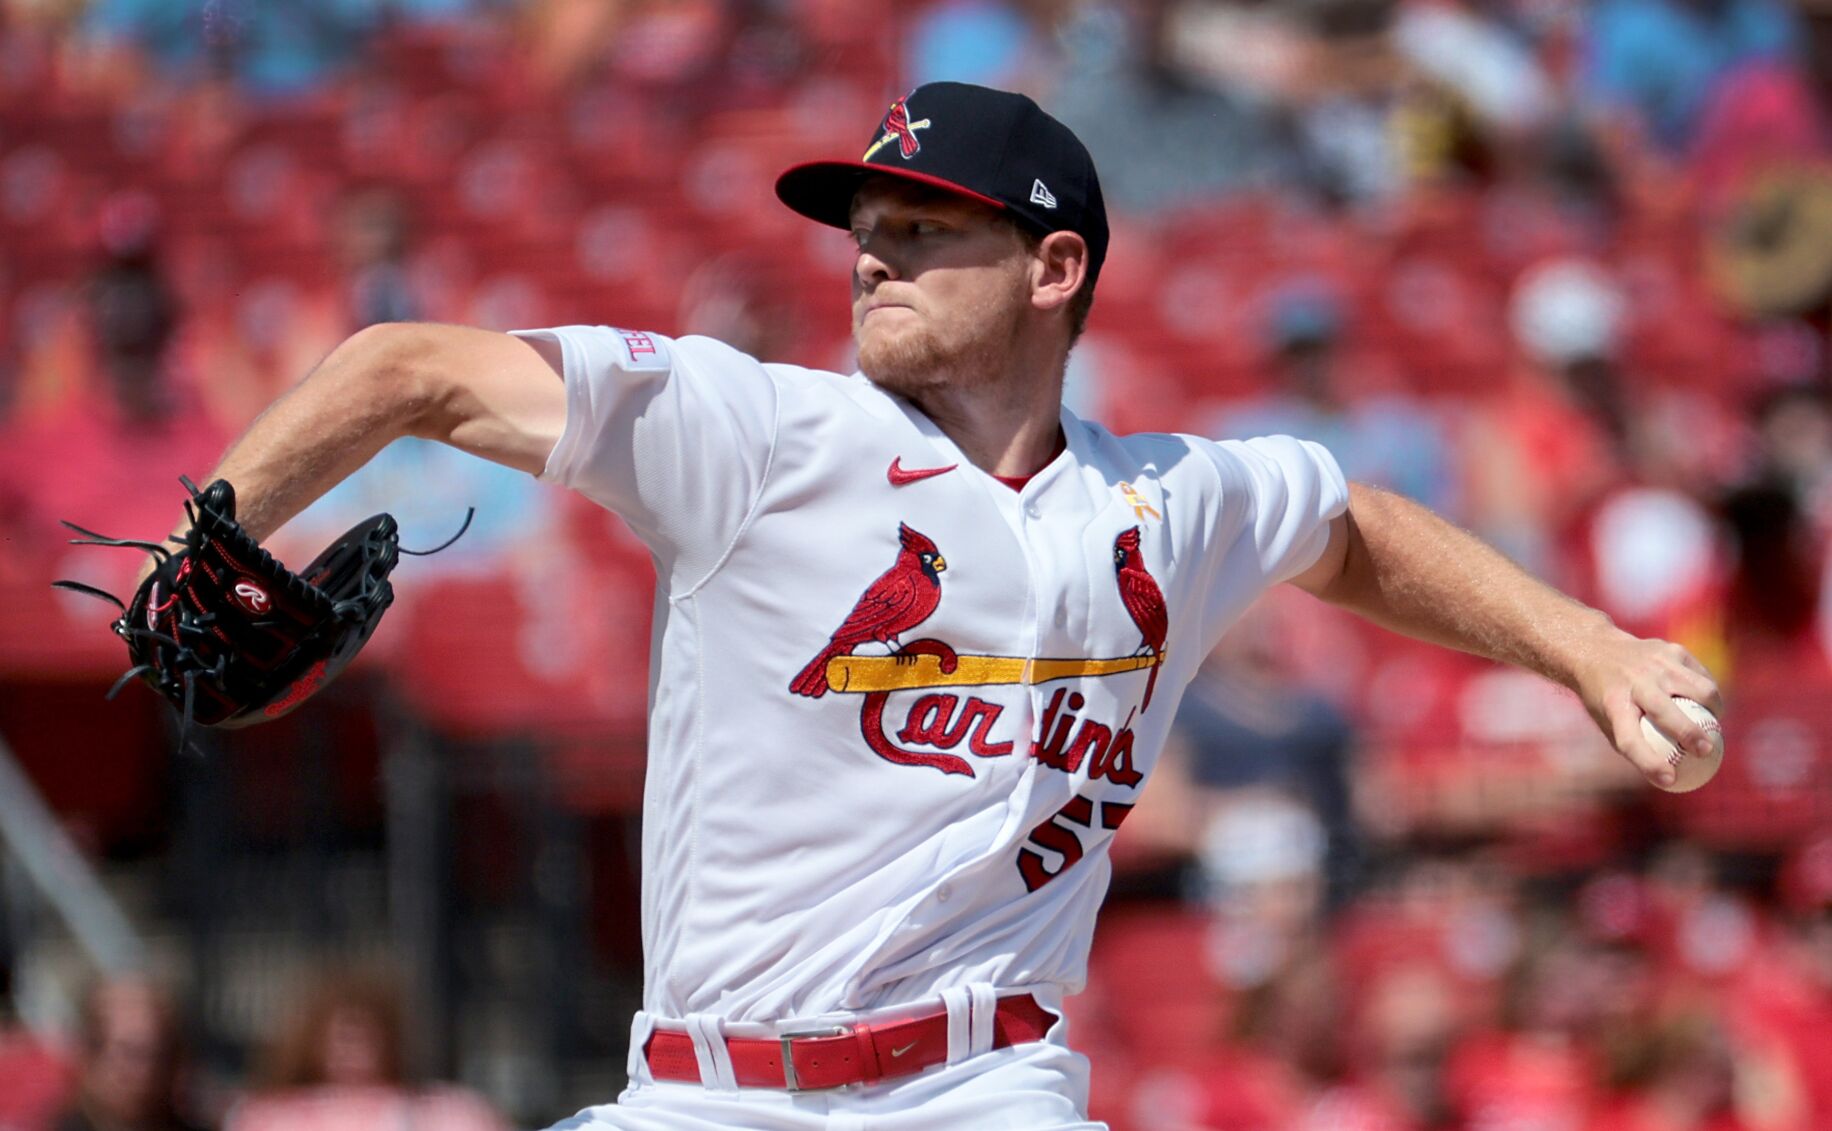 Cardinals make their final streaming-only appearance of season Friday night